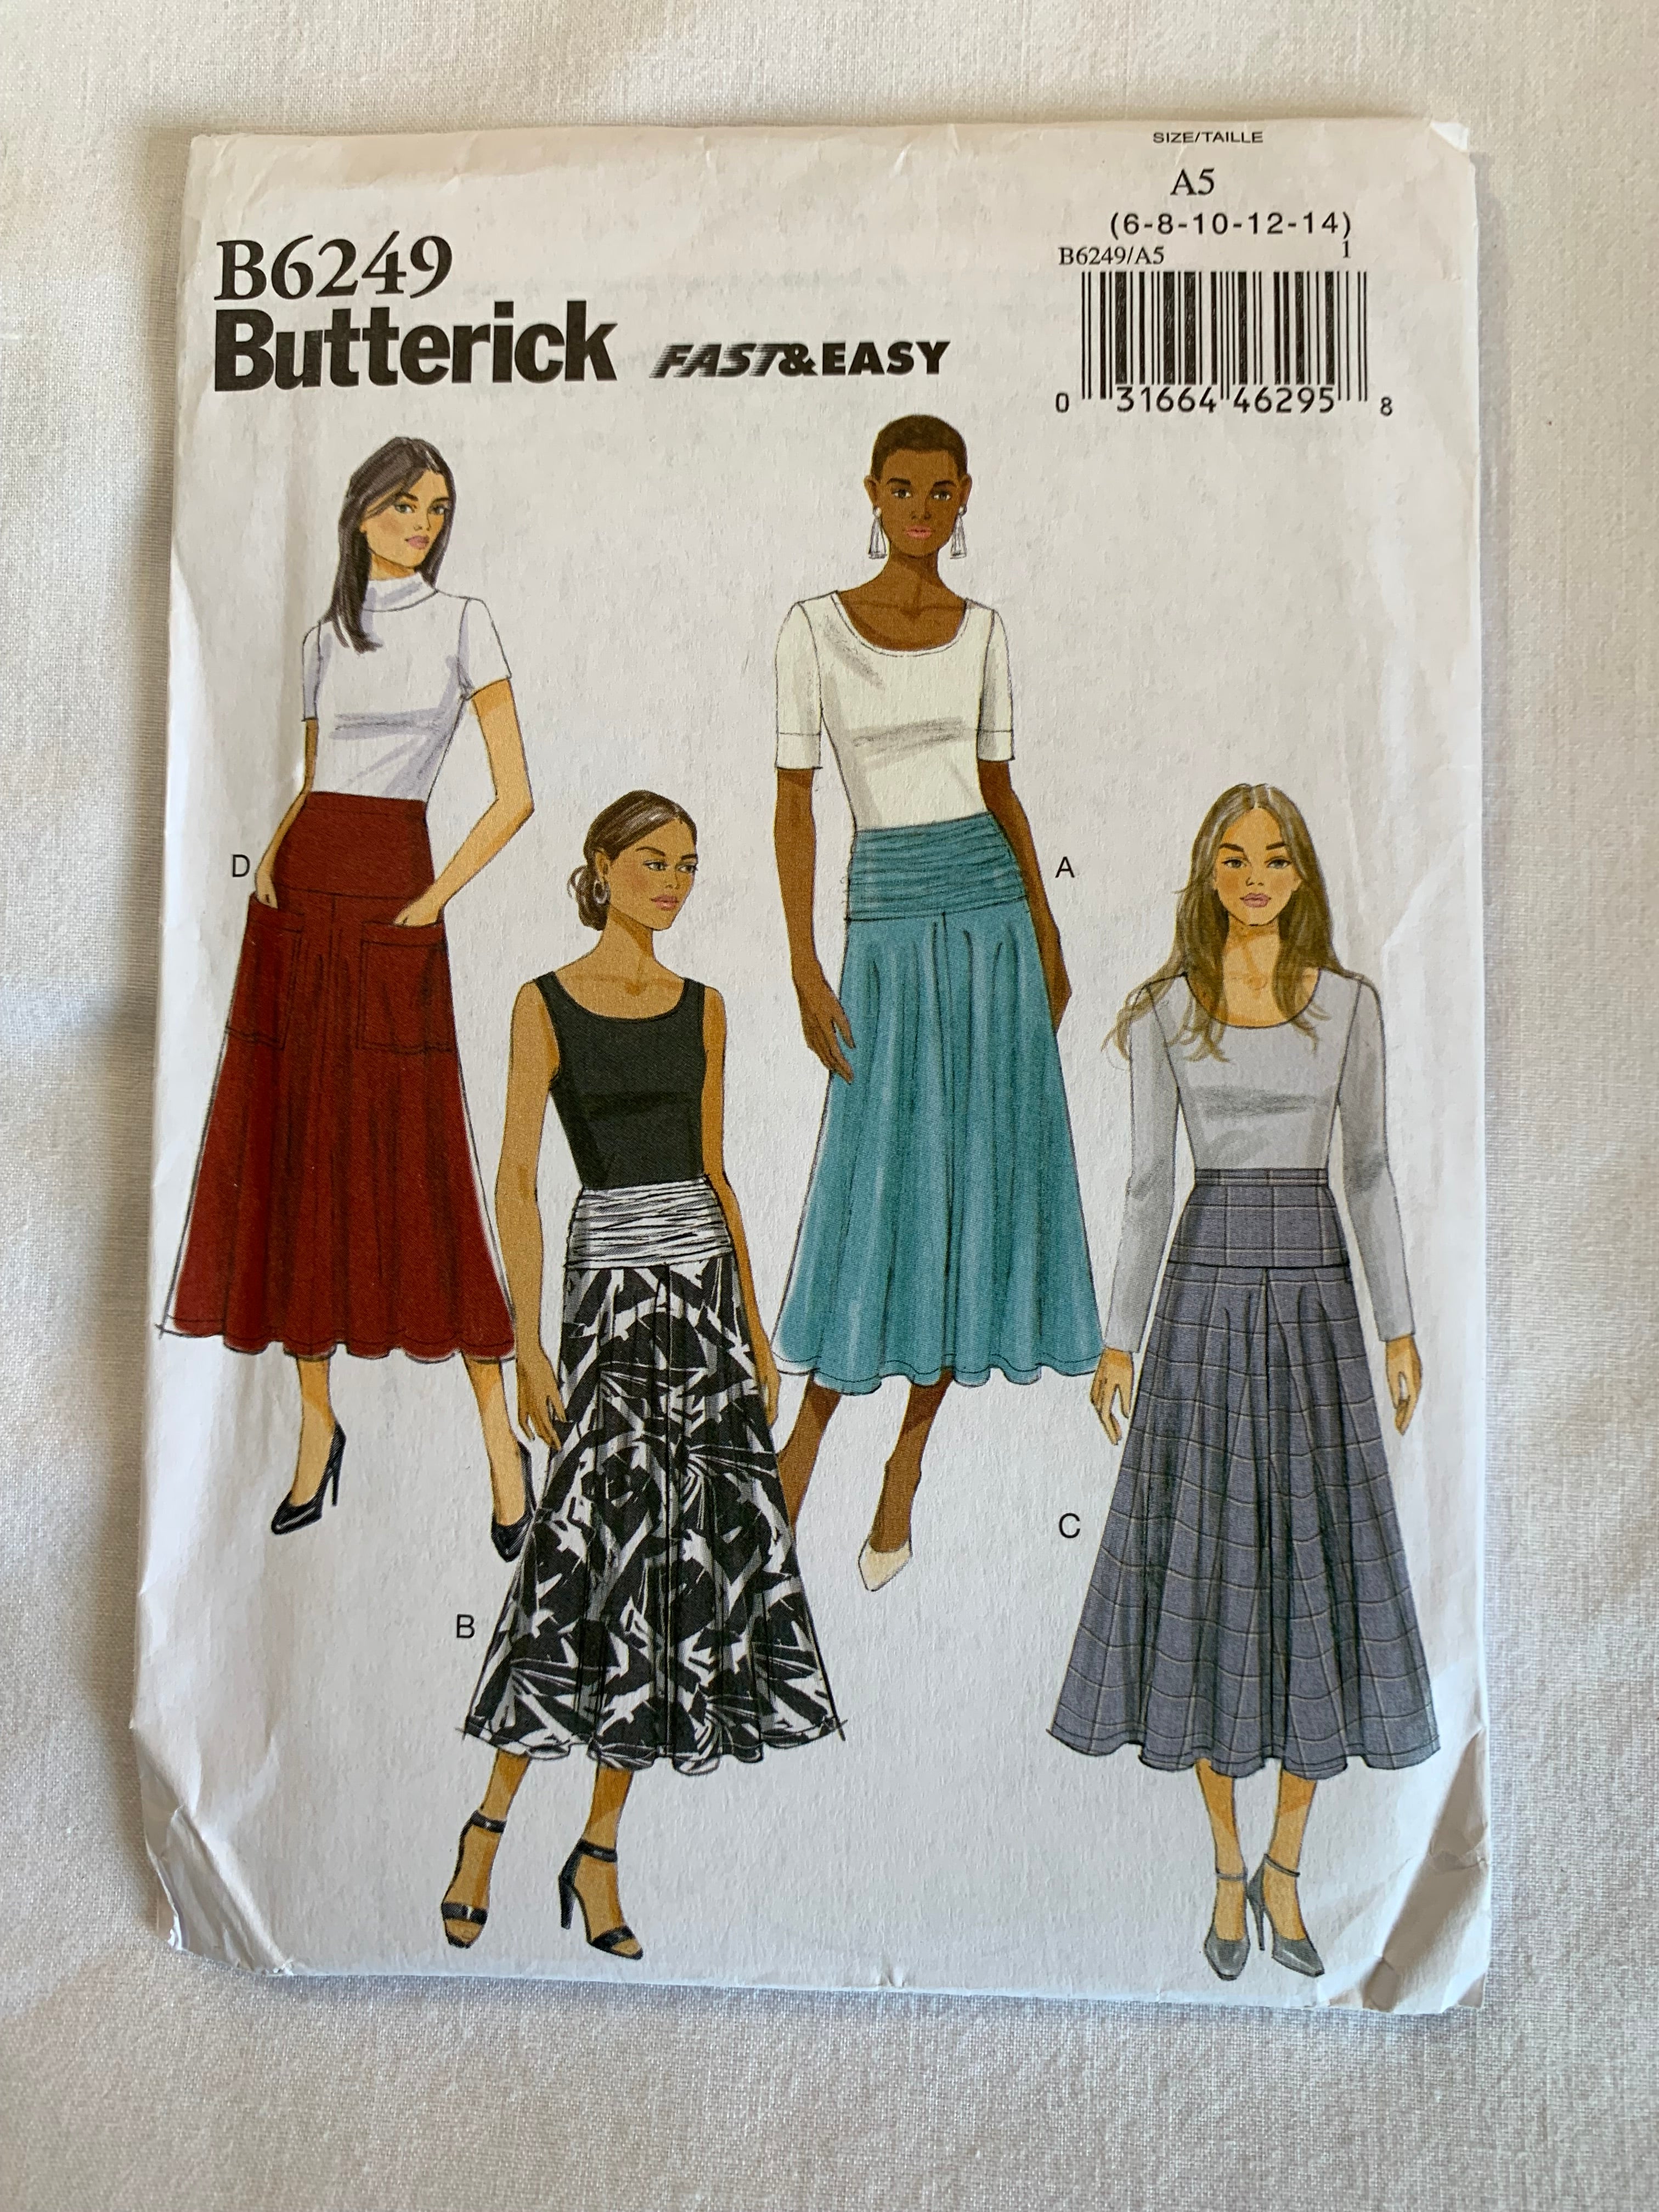 Butterick Sewing Pattern B6249 Misses' Skirts, 4 Variations, Pockets